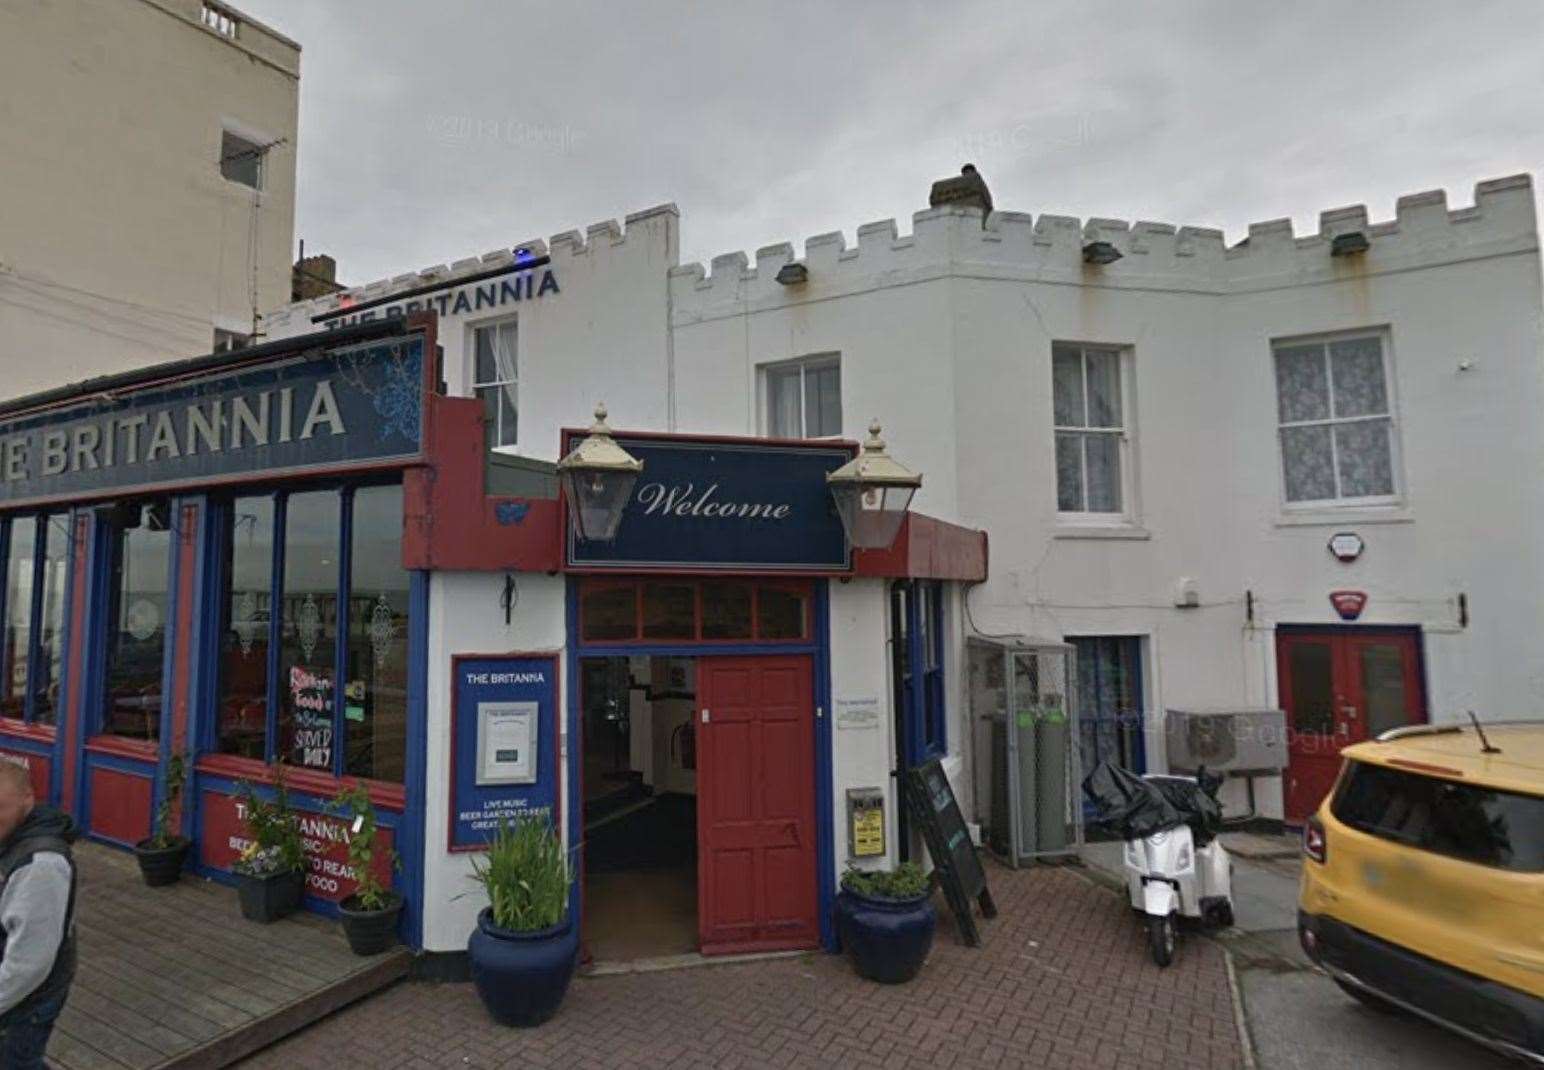 The Britannia in Margate has been closed since January 2020